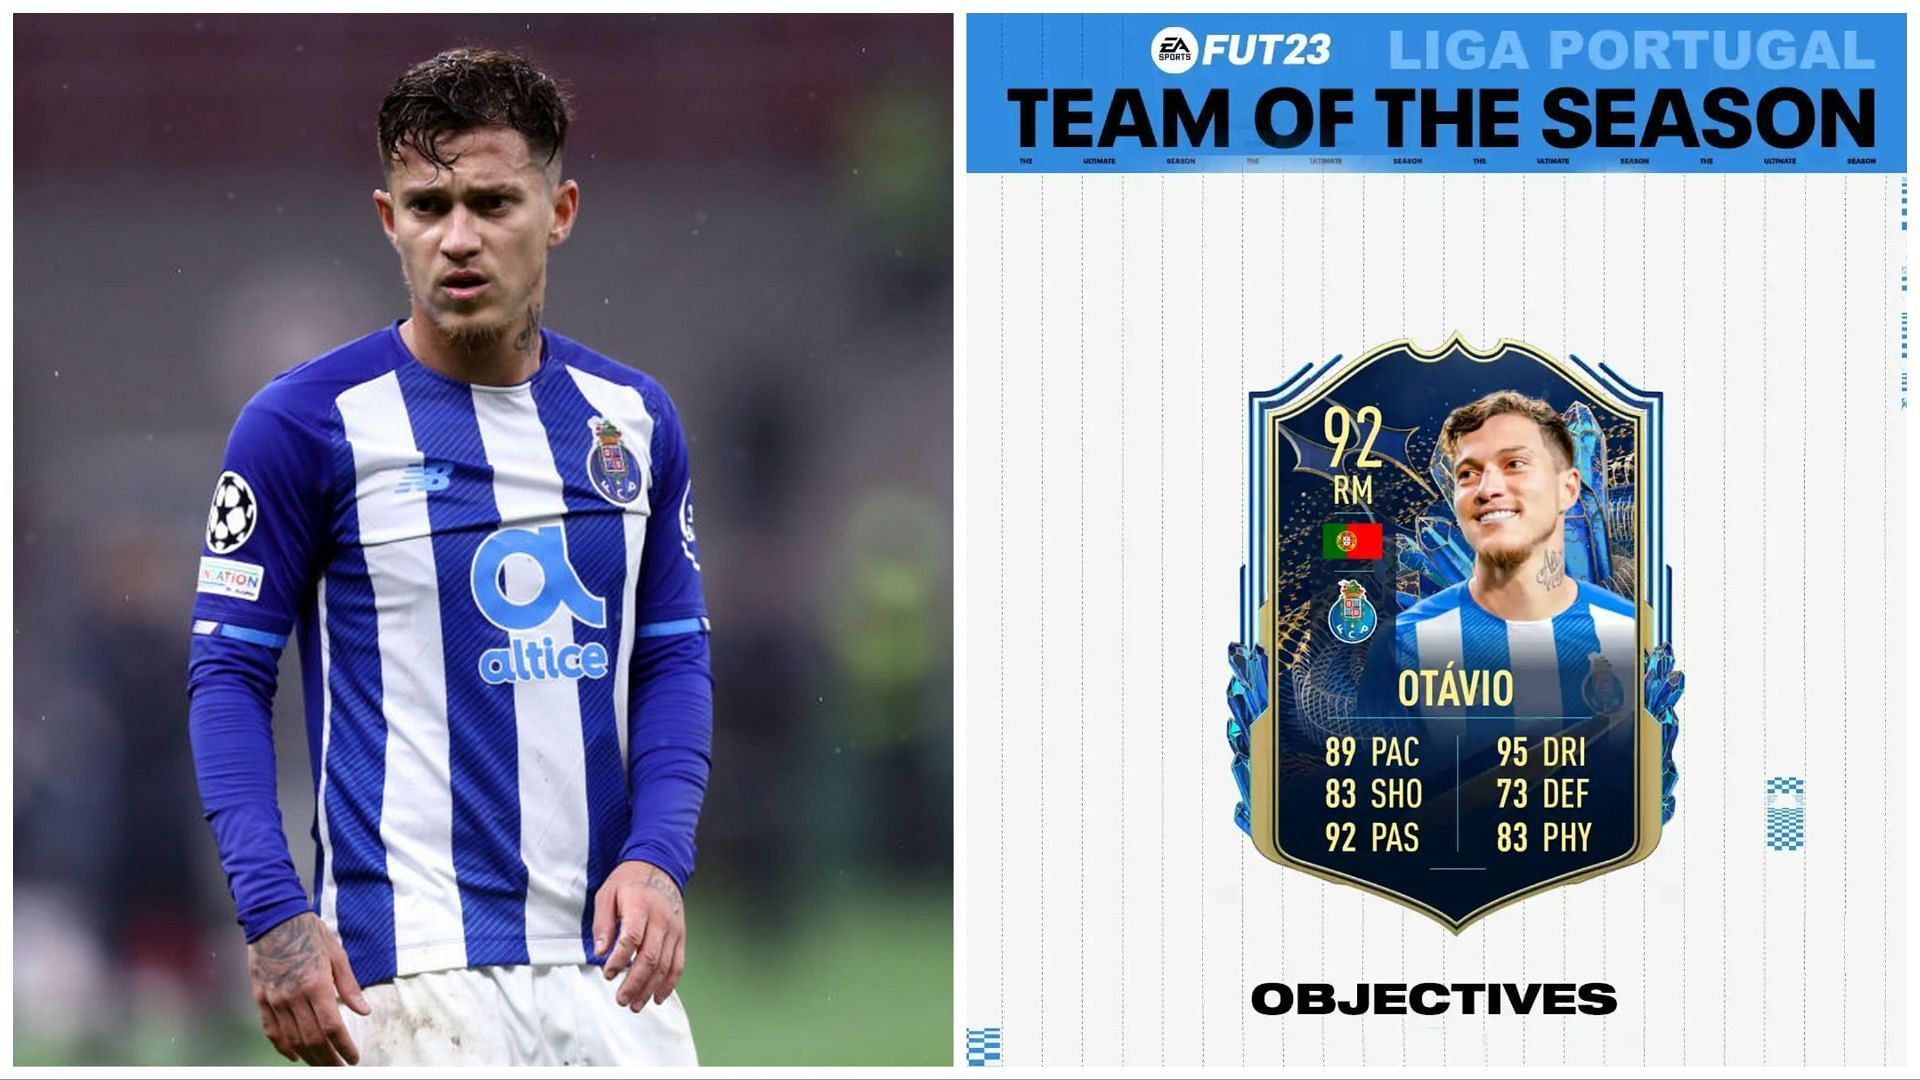 TOTS Otavio has been leaked (Images via Getty and Twitter/FIFAUTeam)